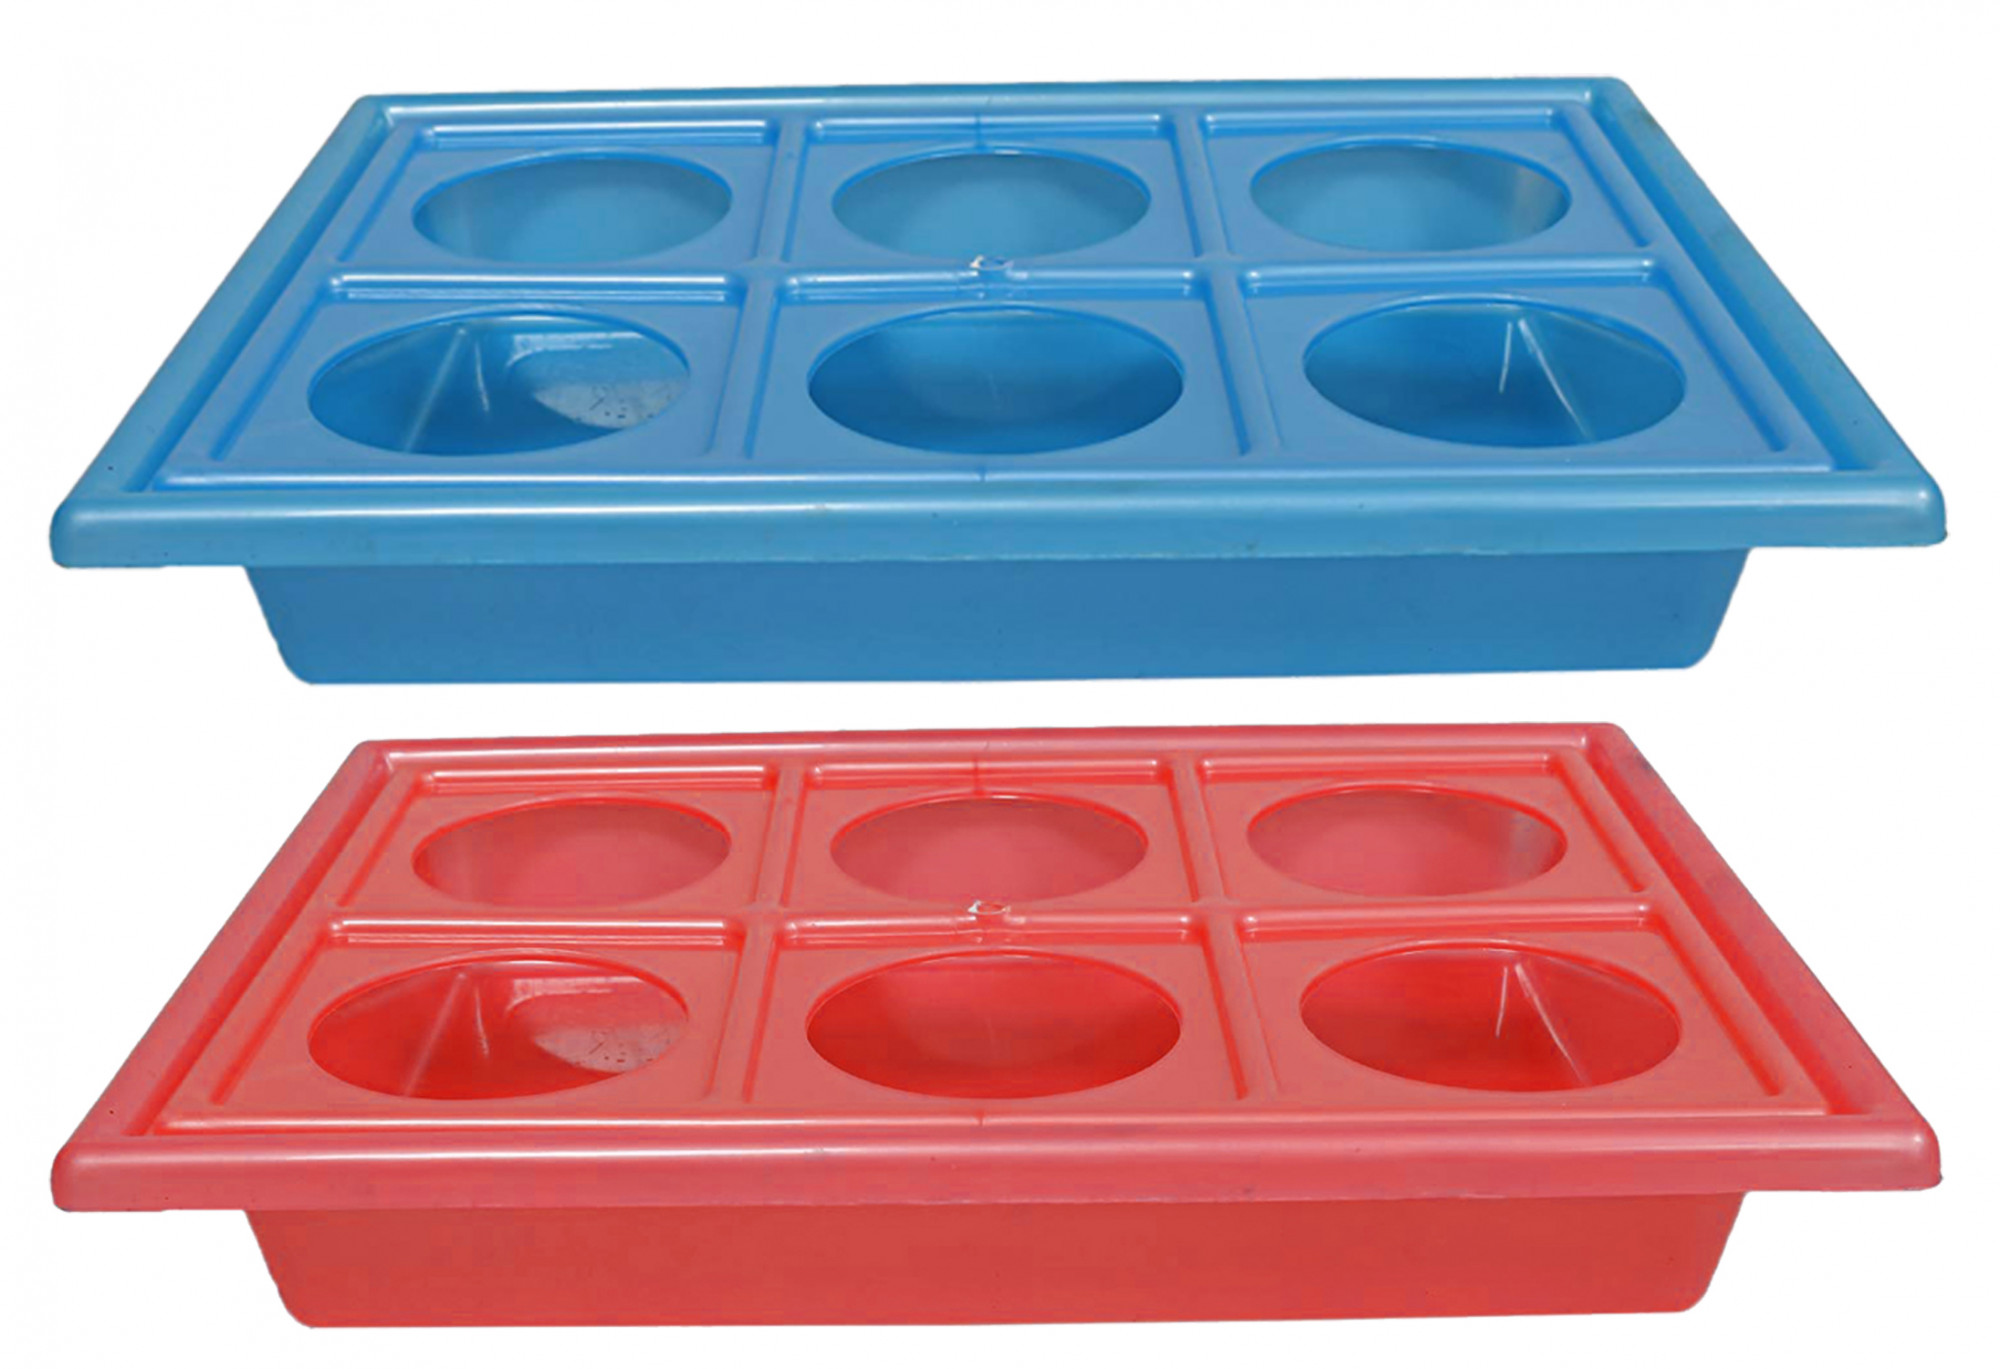 Kuber Industries Tray with Cutout Handles, Cup Display for Kitchenware, Plastic Glass Holder, One Size, 6 Slots-Pack of 2 (Blue & Pink)